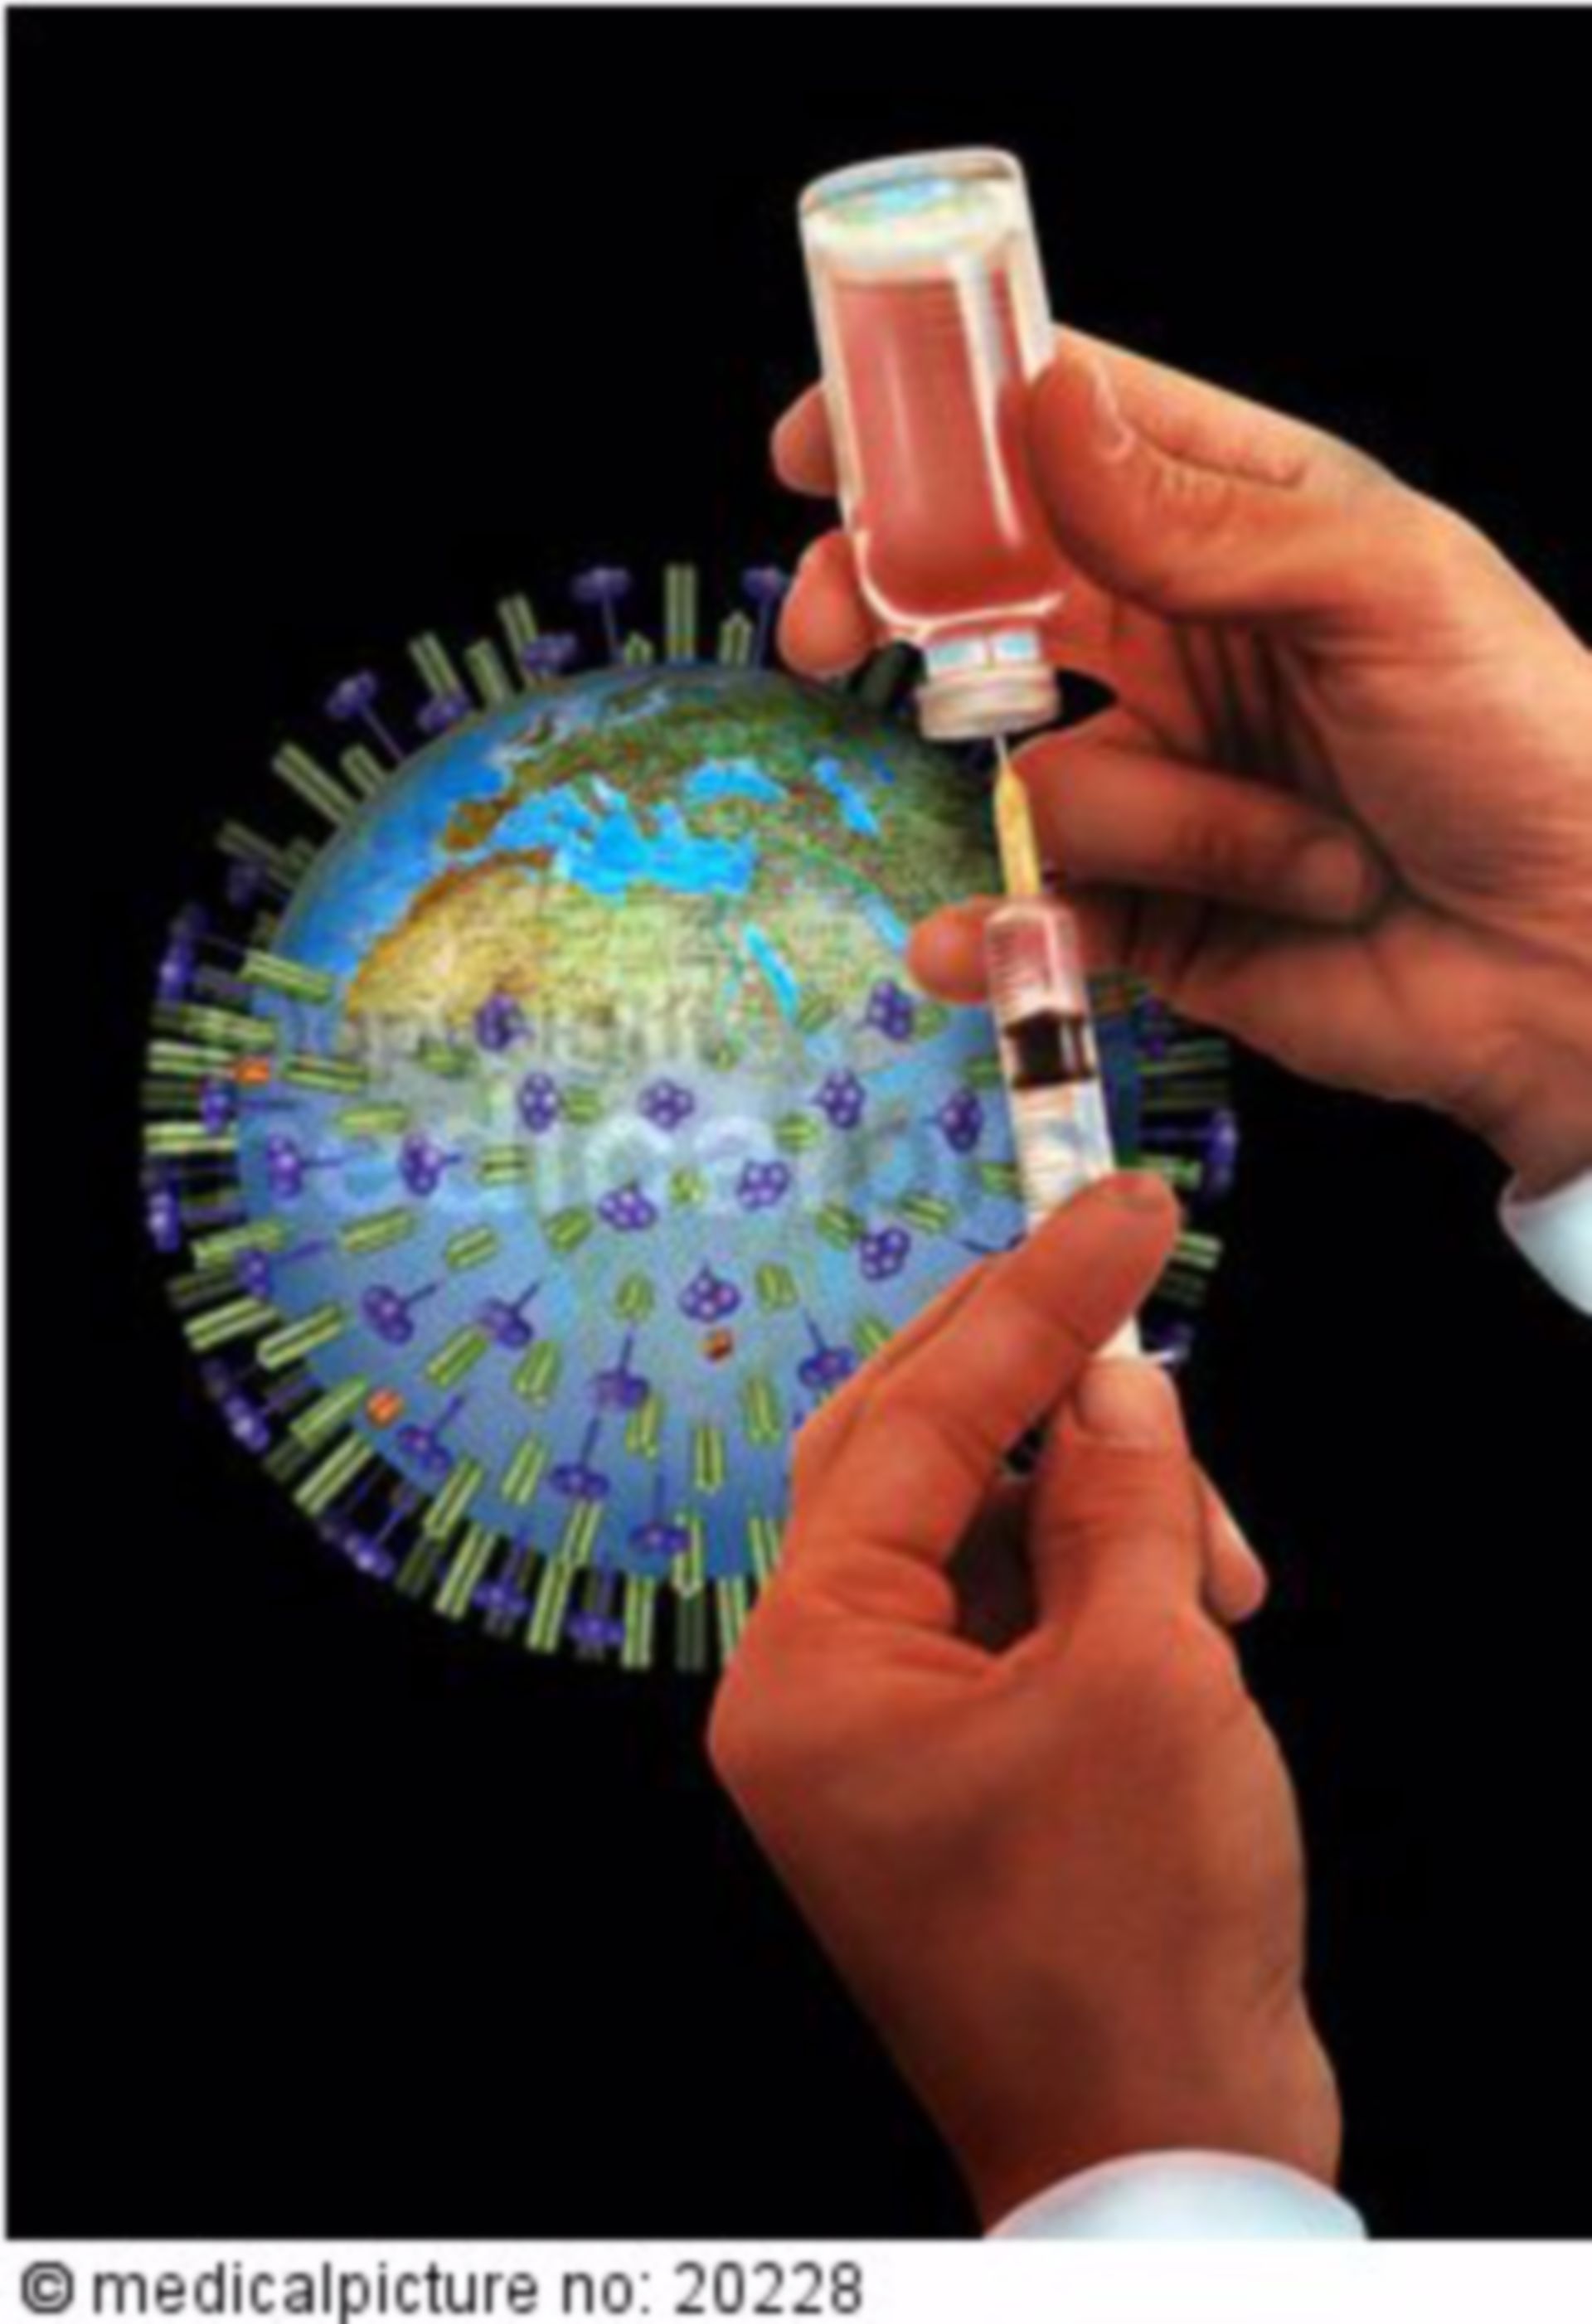 H5N1 virus and vaccination